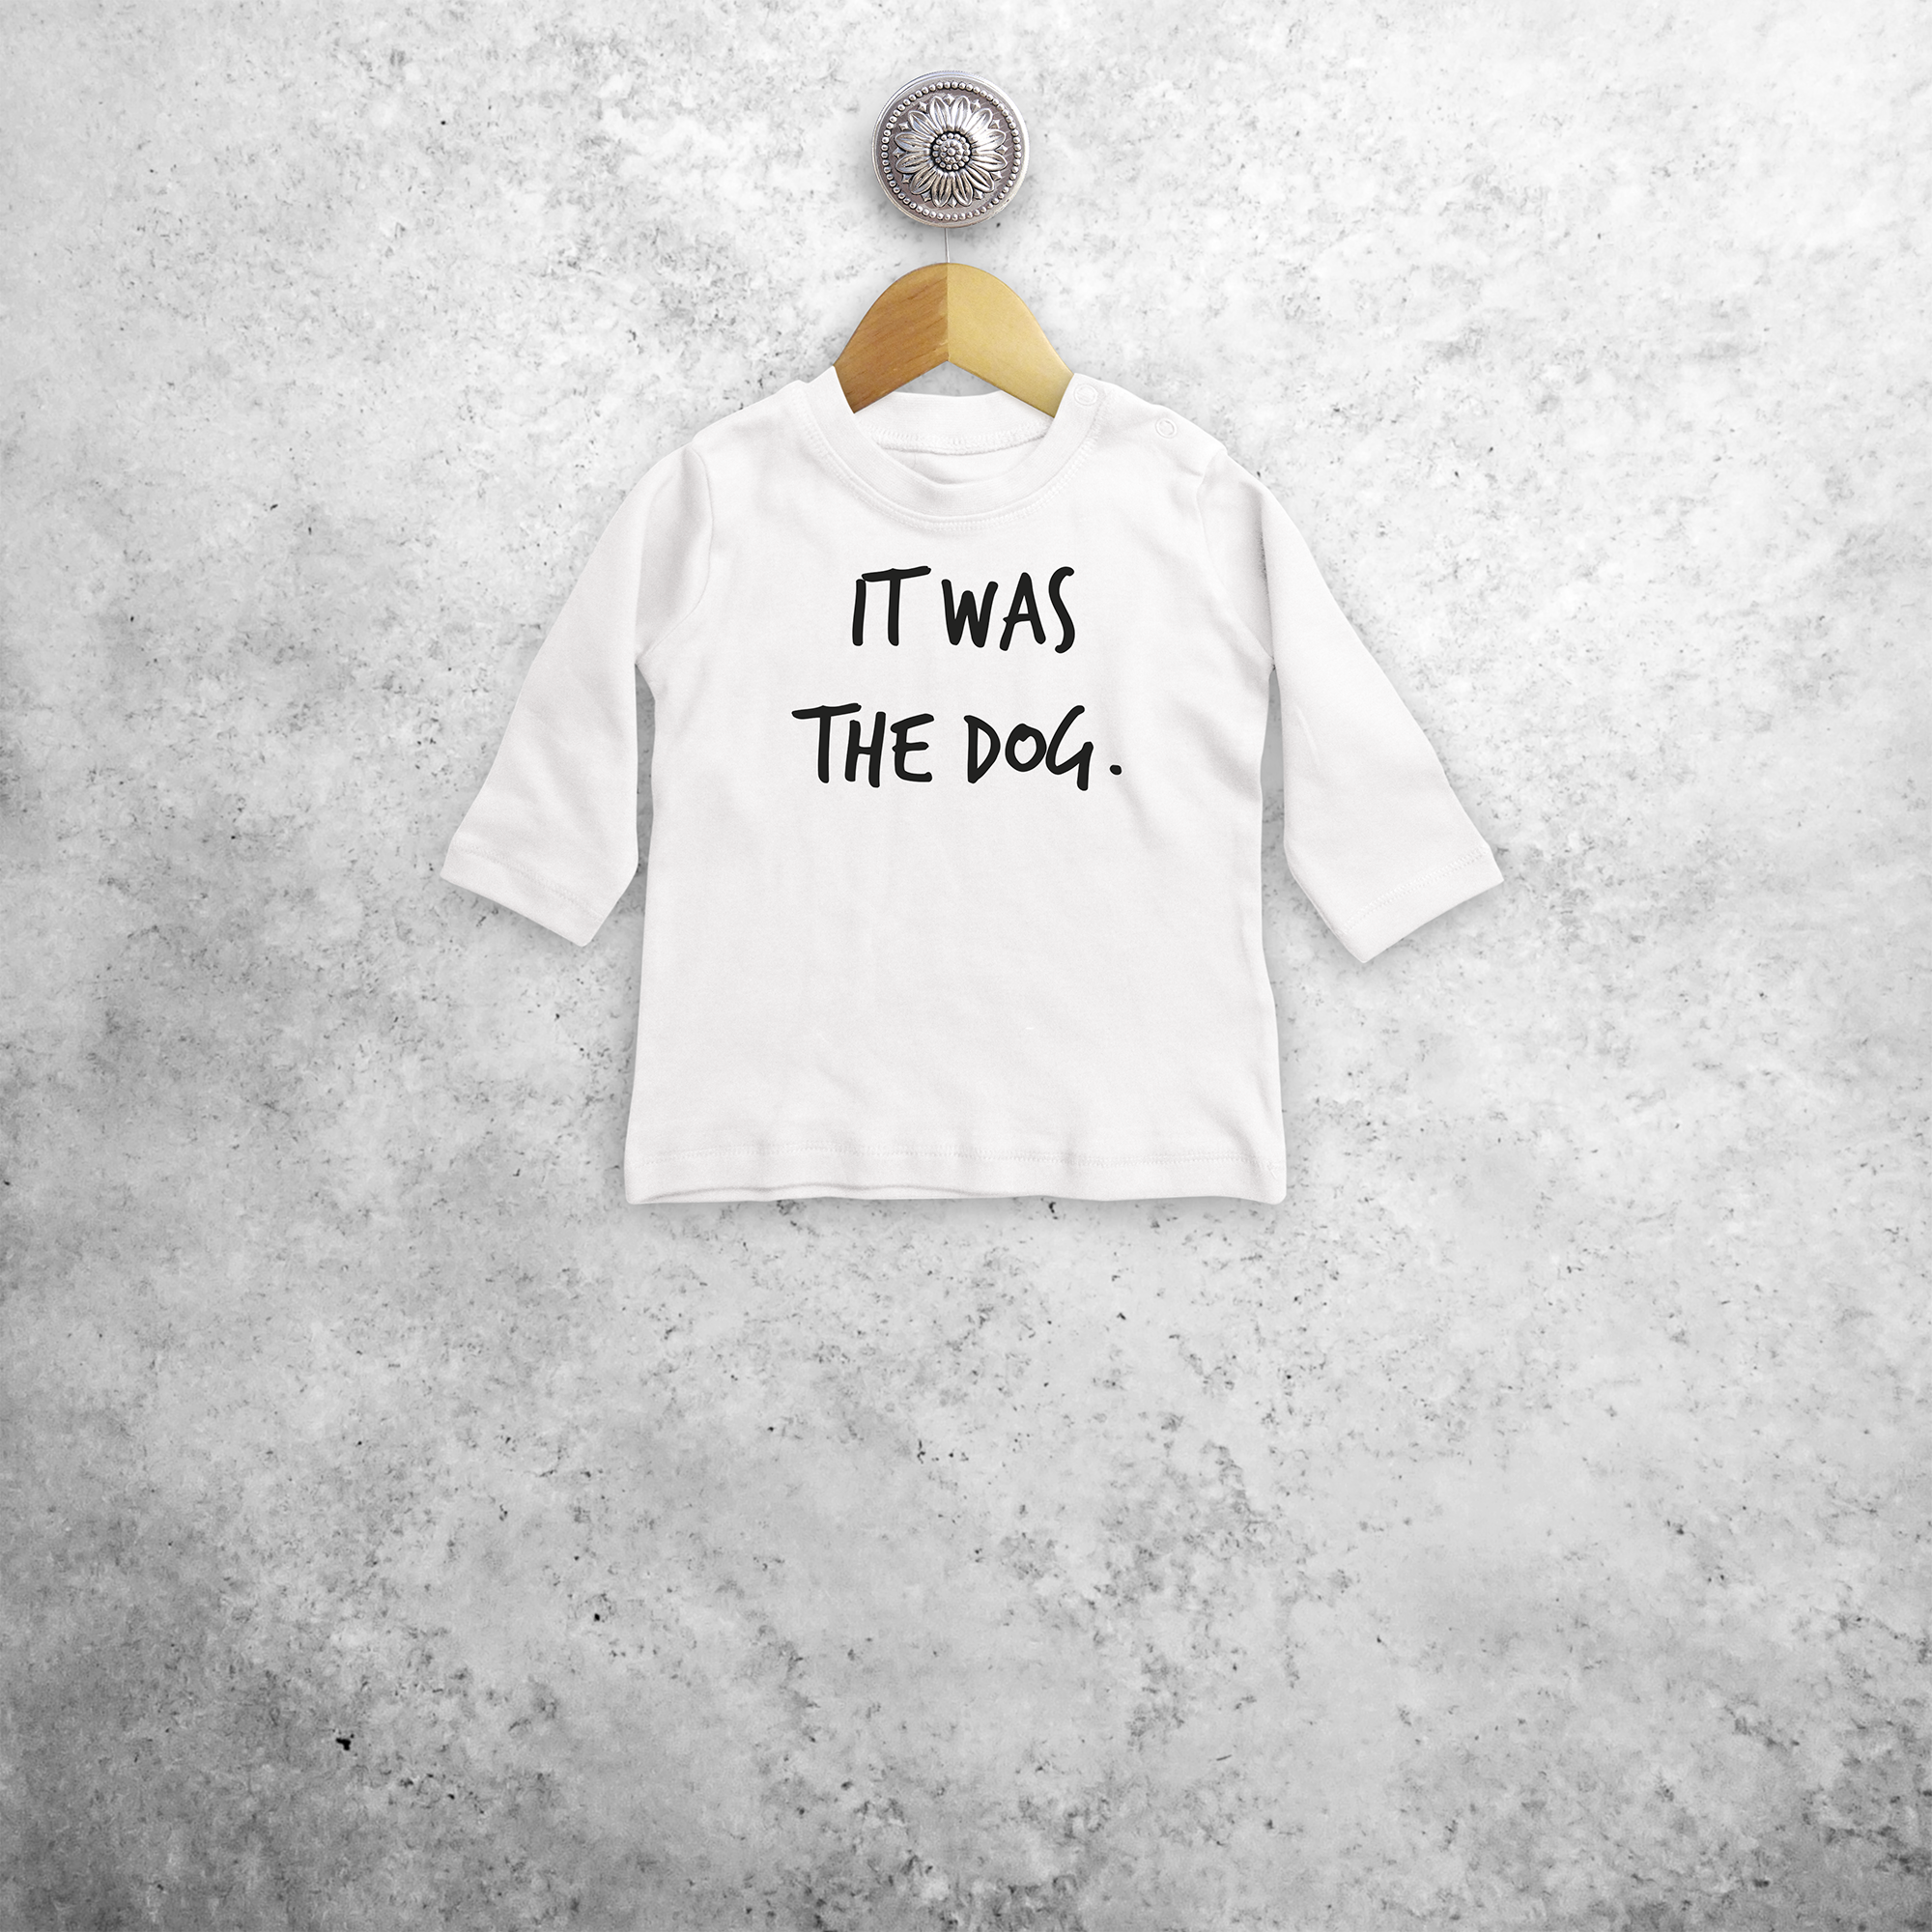 'It was the dog' baby longsleeve shirt